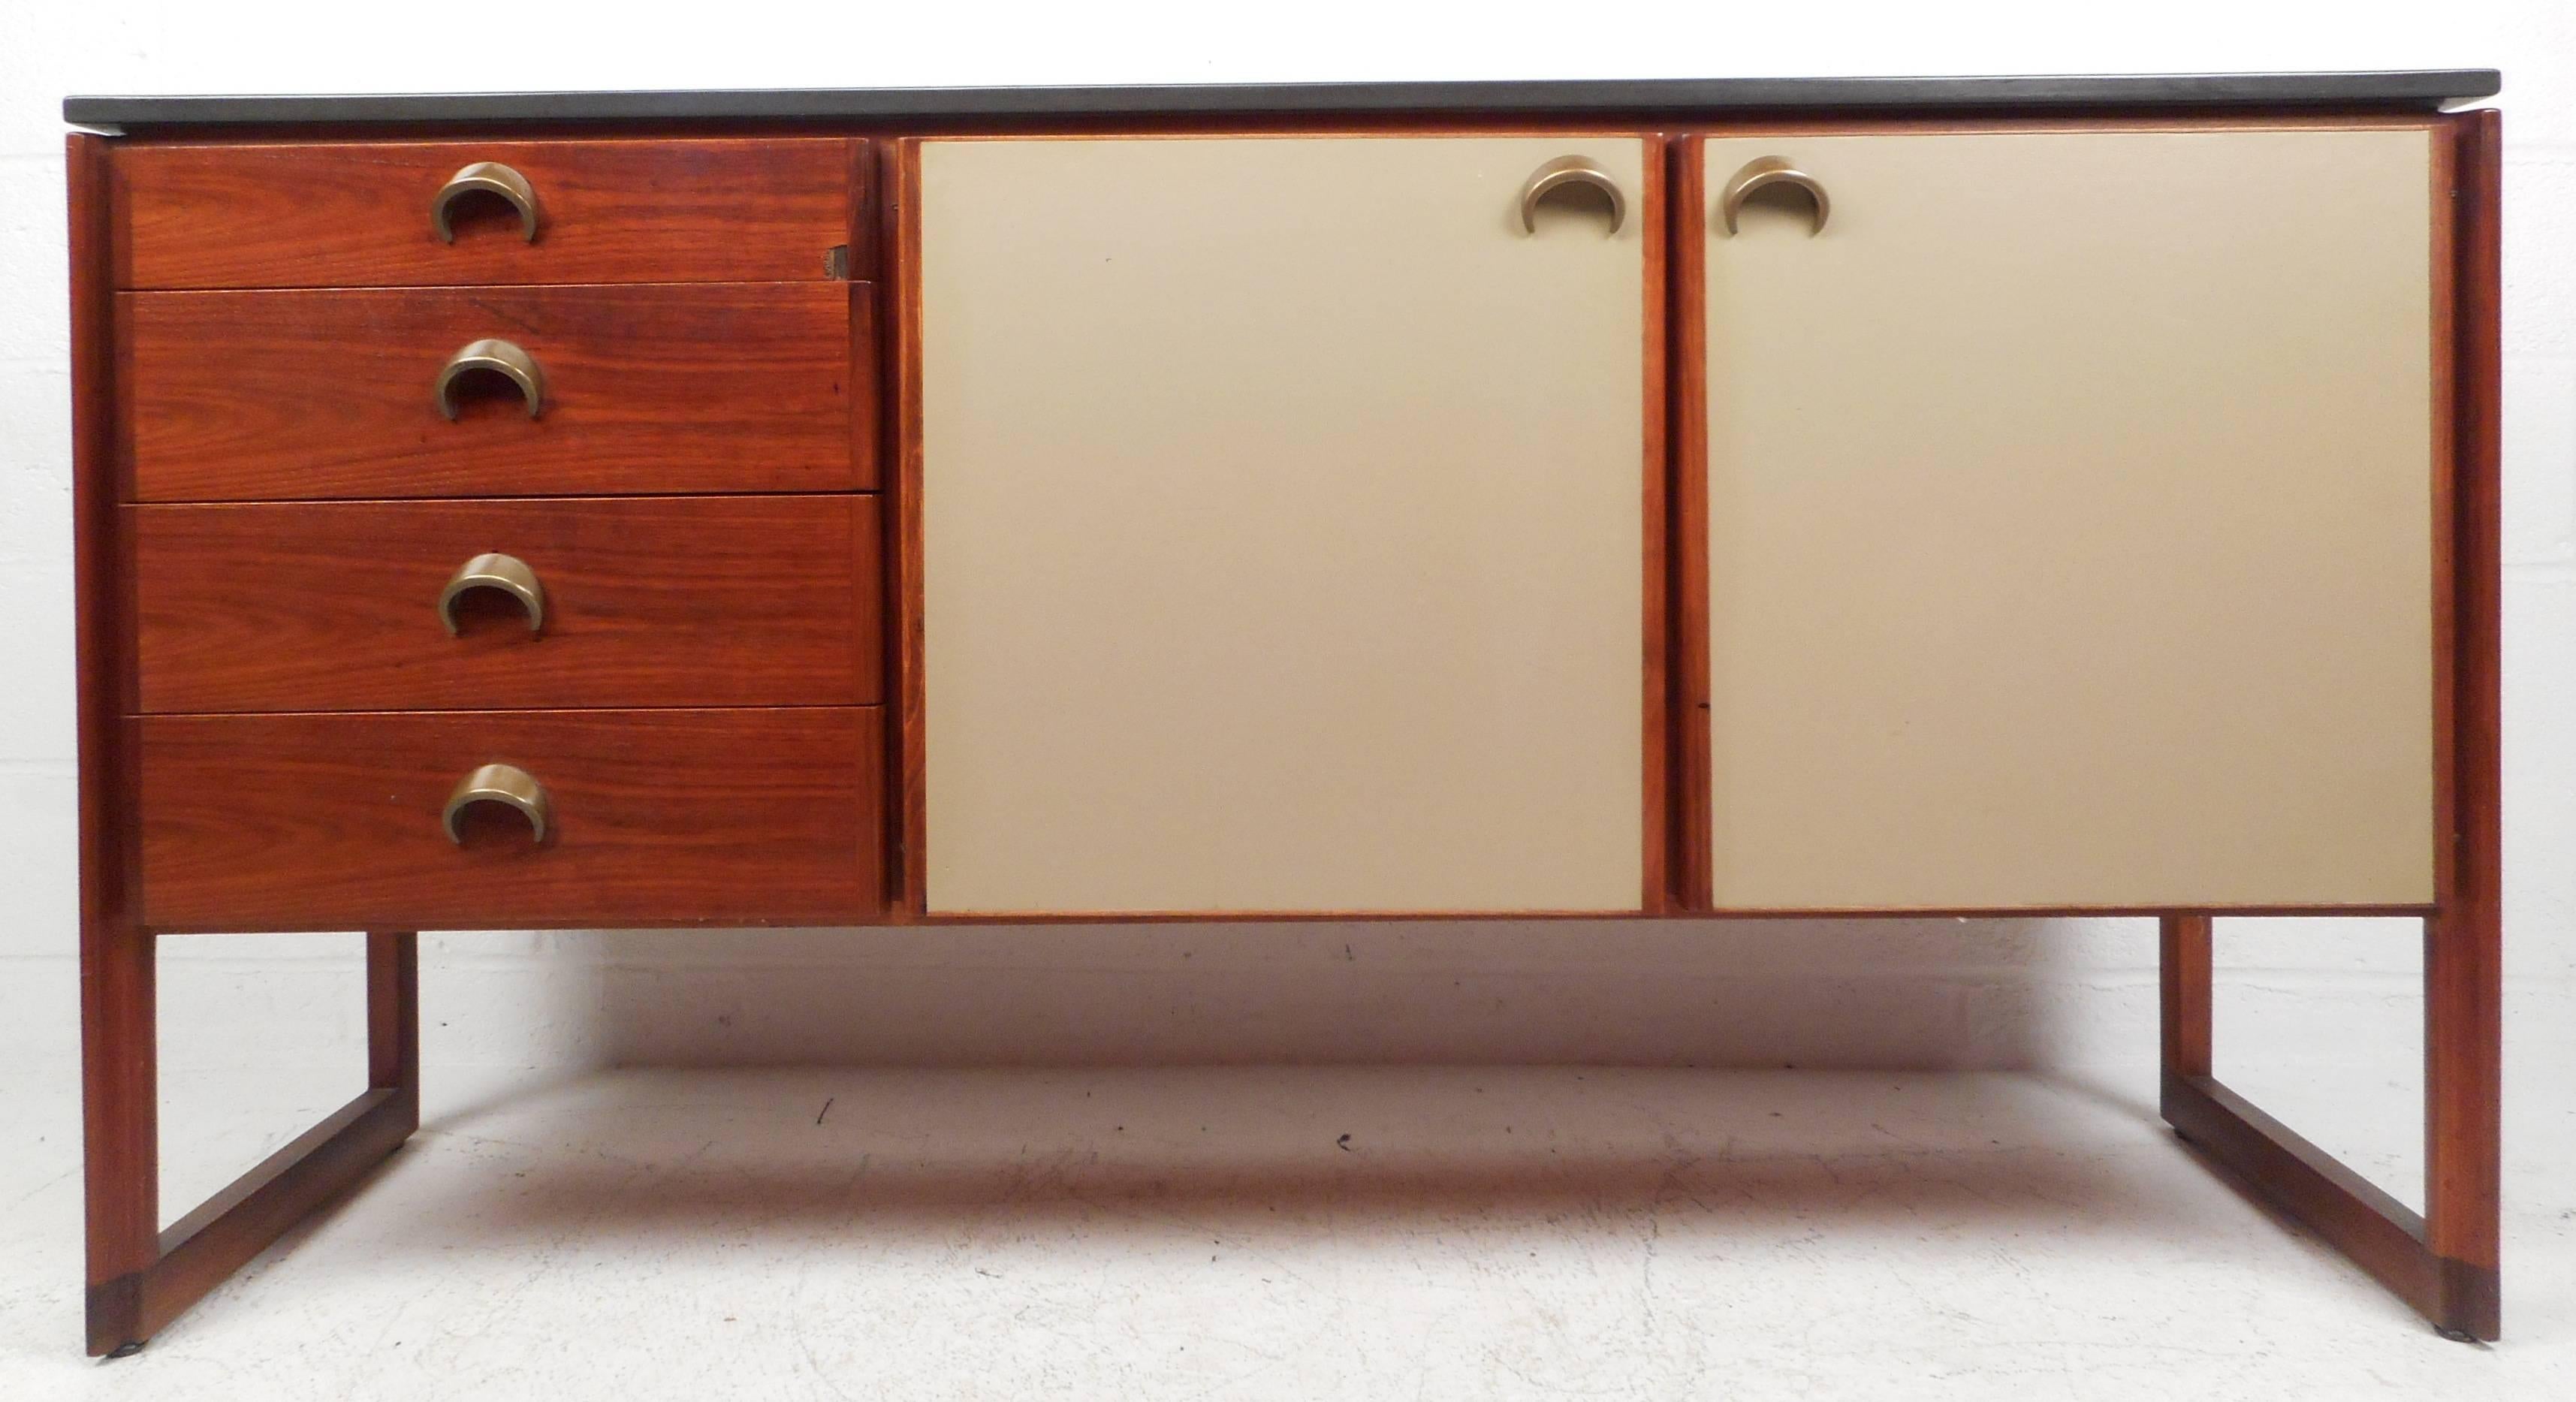 This divine vintage modern sideboard features a sleek black marble top, unique brass eclipse pulls, and off white leather cabinet fronts. The four drawers and two cabinets with shelving provide plenty of storage space while remaining true to the